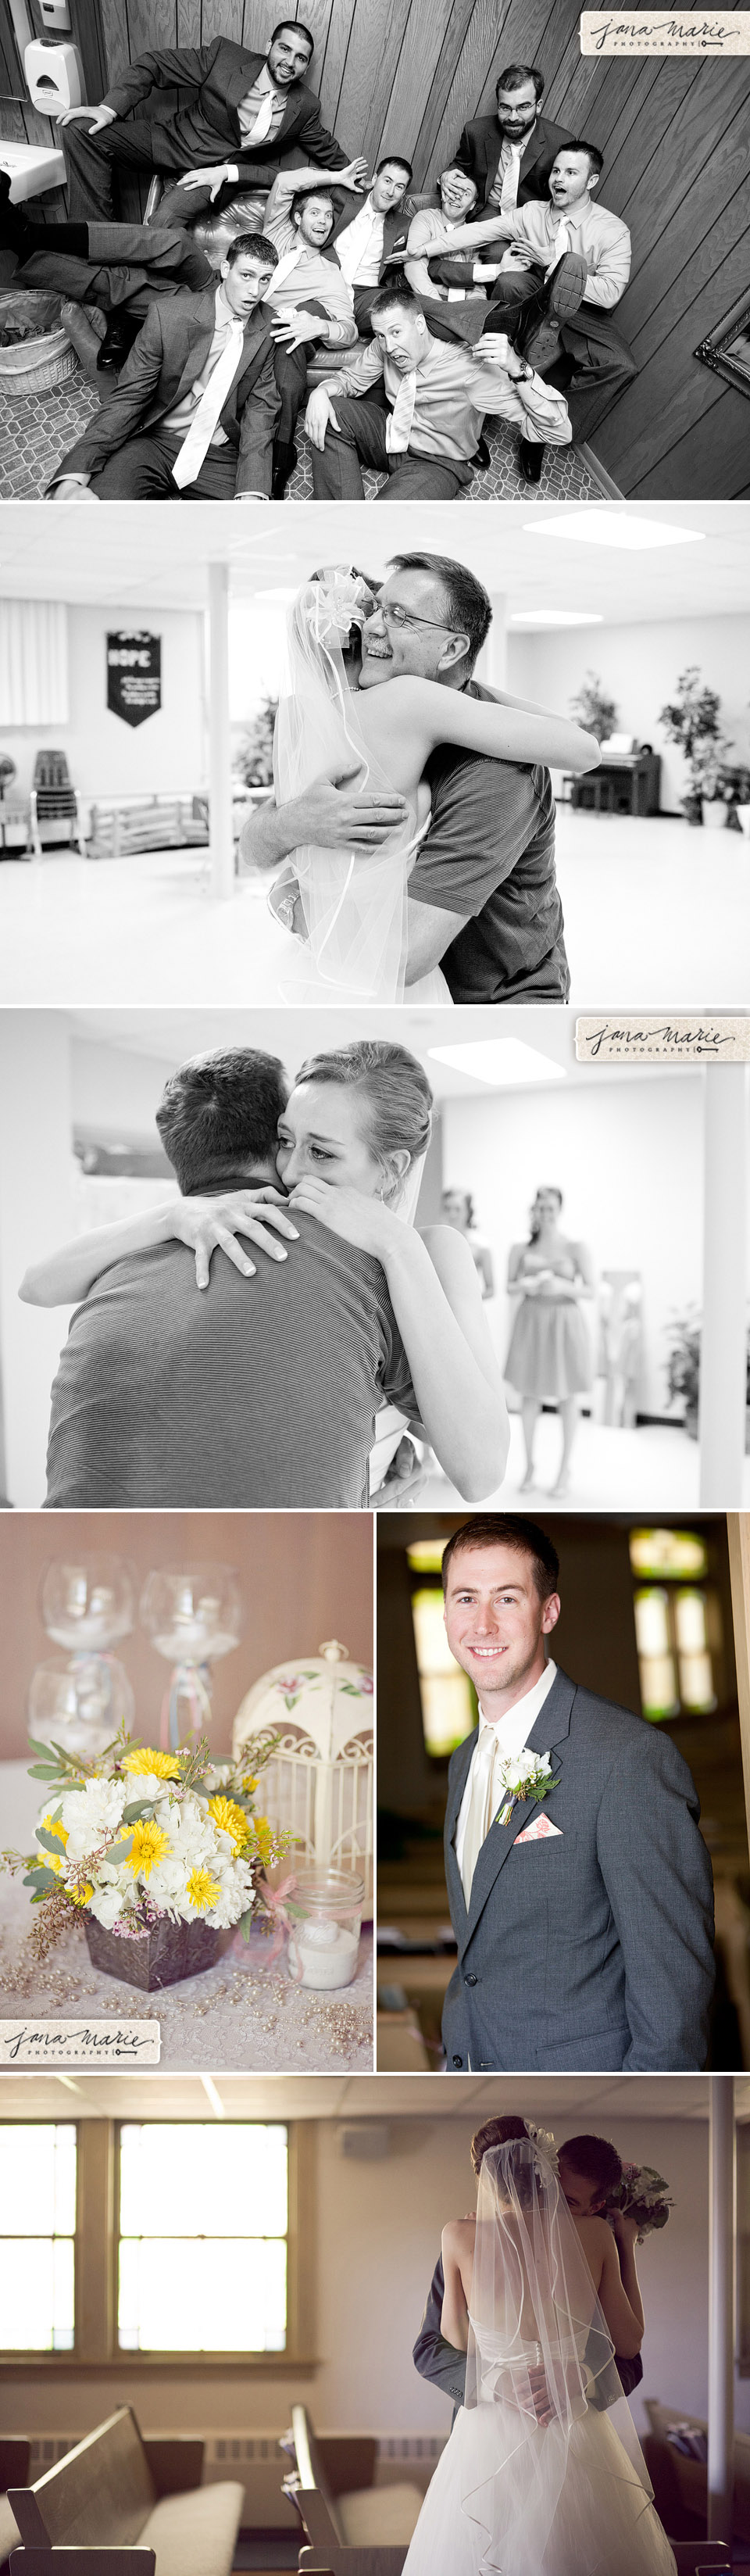 First sites, groom, candles, wedding decor, unique ideas, Tears, Happiness, Guest table, Father of the bride